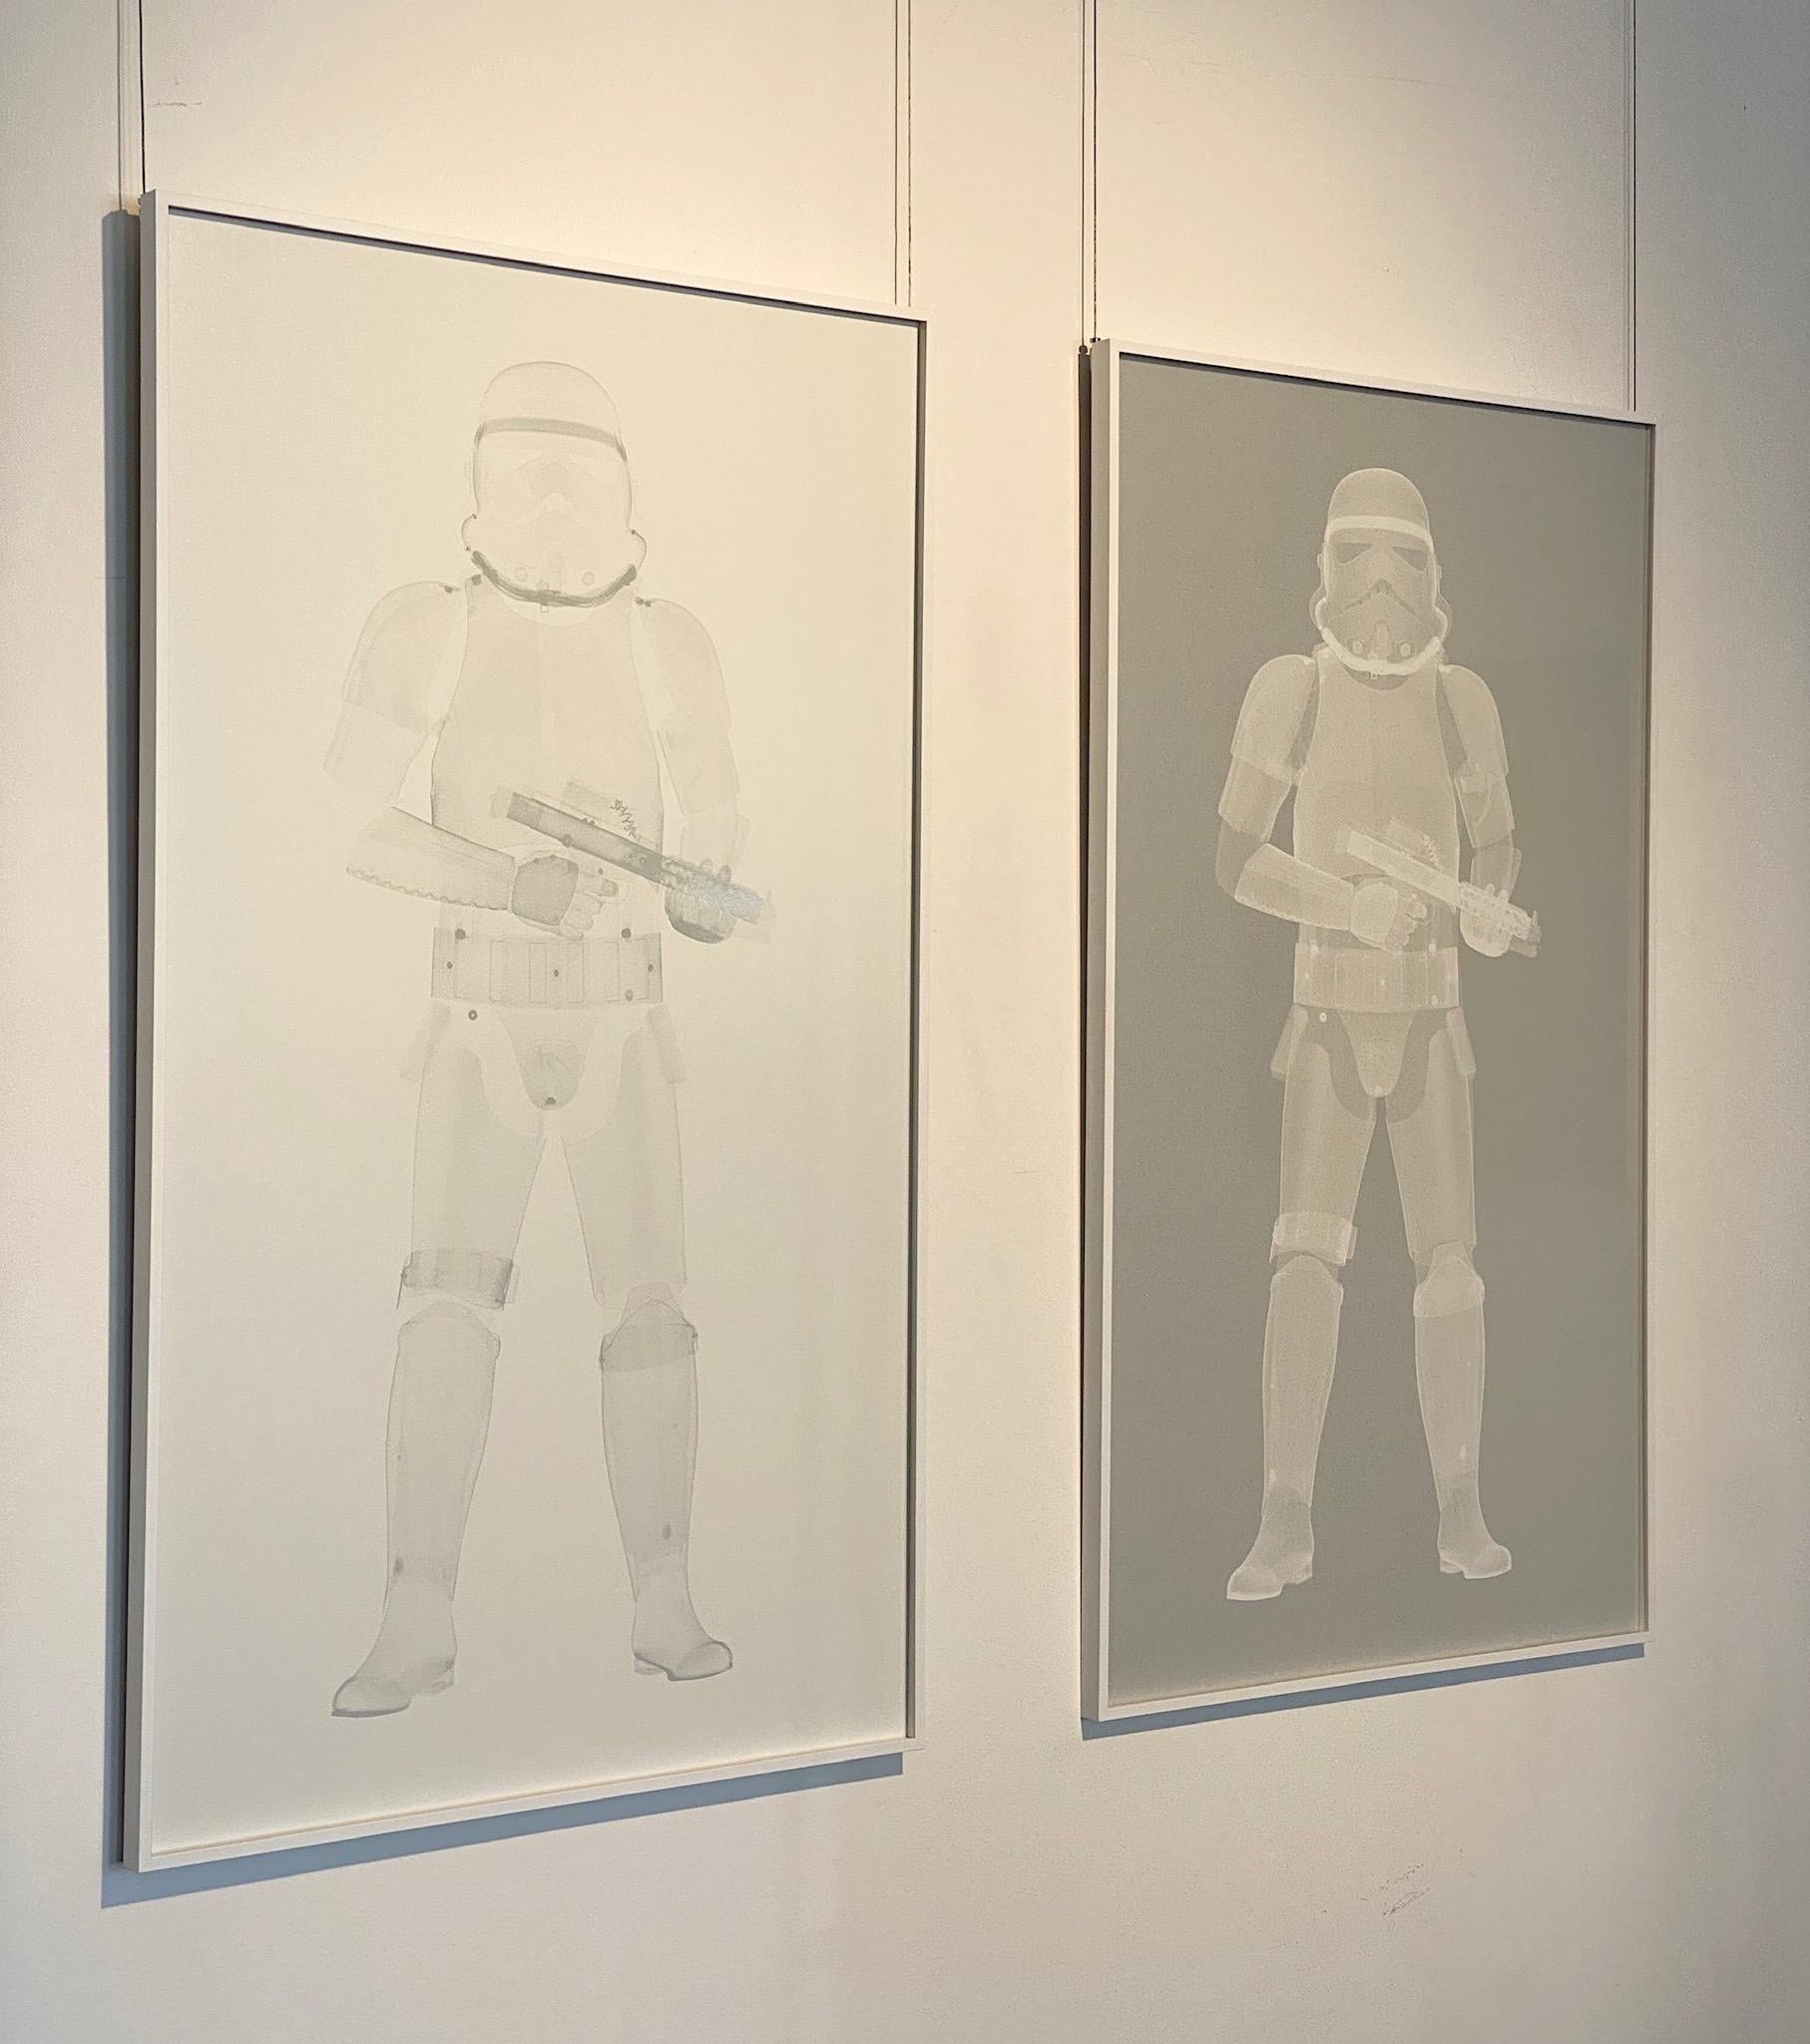 Nick Veasey
Stormtrooper Diptych
47 x 27.5 inches each, Edition of 15
X-ray image printed white onto retroreflective vinyl. 
A high intensity prismatic art piece that constantly interacts with light.
Signed and numbered by artist

Currently on